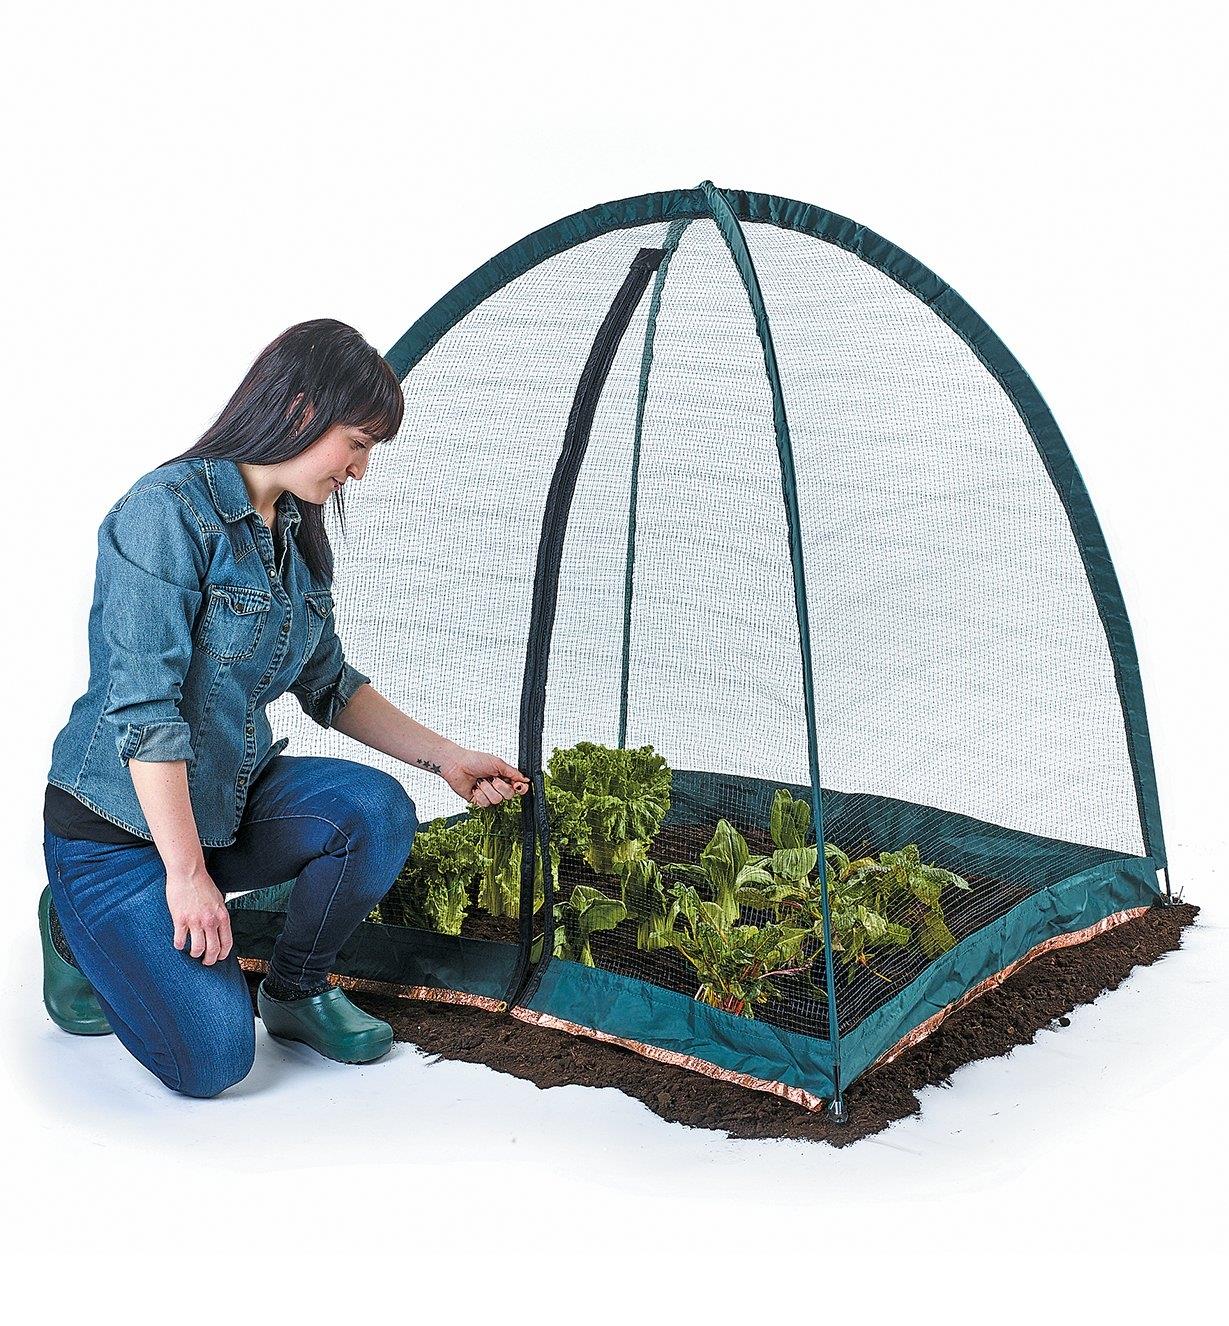 A woman unzips the Pop-Up Plant Dome covering a vegetable garden